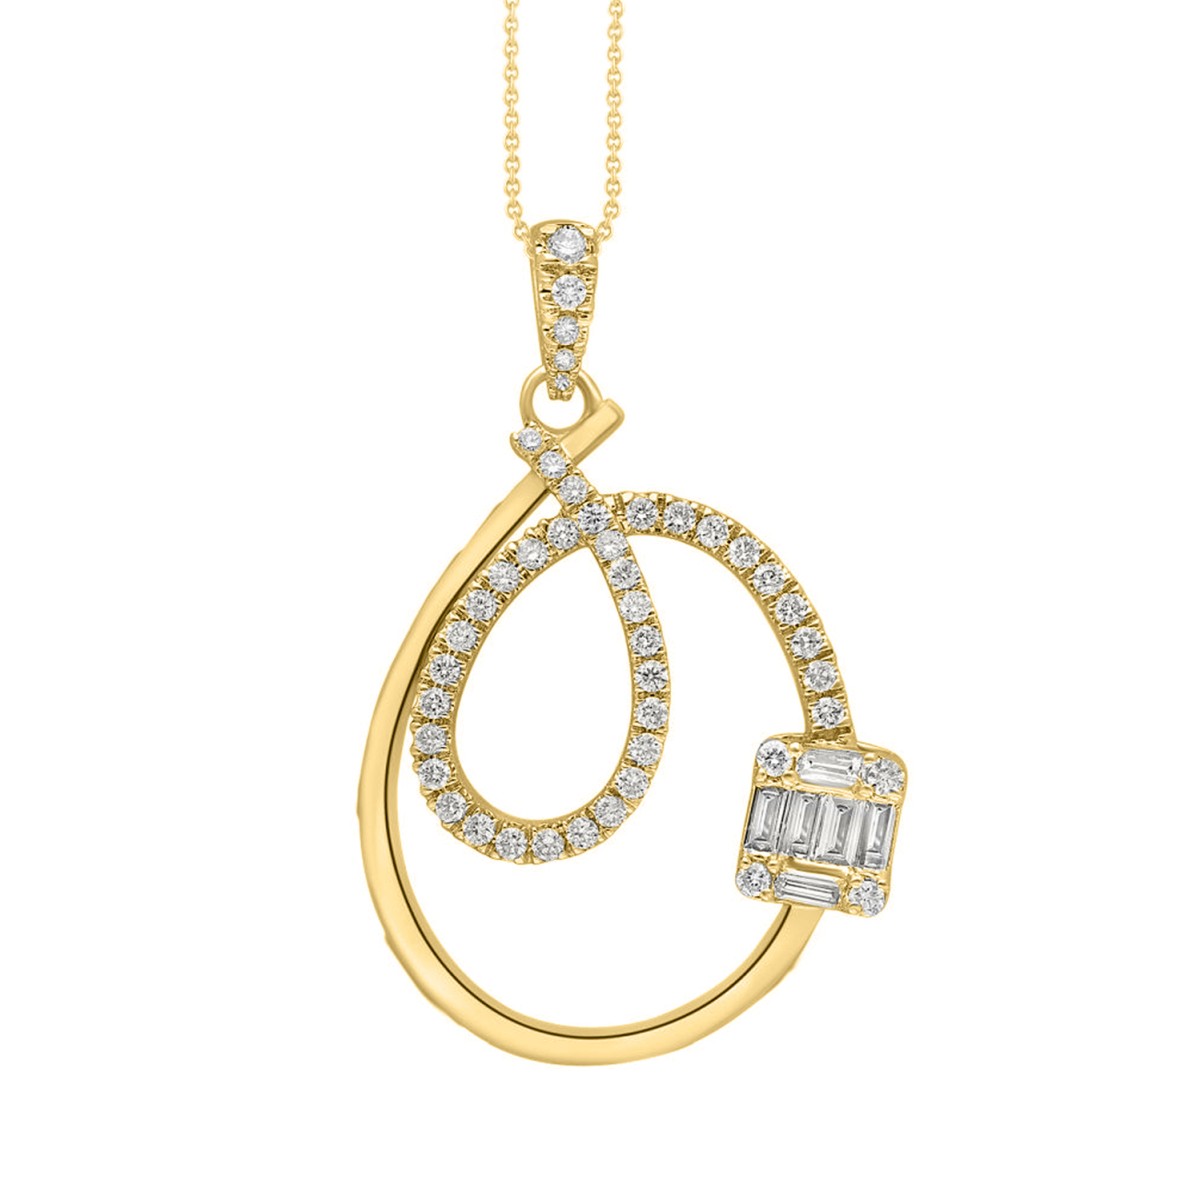 14K YELLOW GOLD 3/8CT ROUND/BAGUETTE DIAMOND LADIES PENDANT WITH CHAIN 